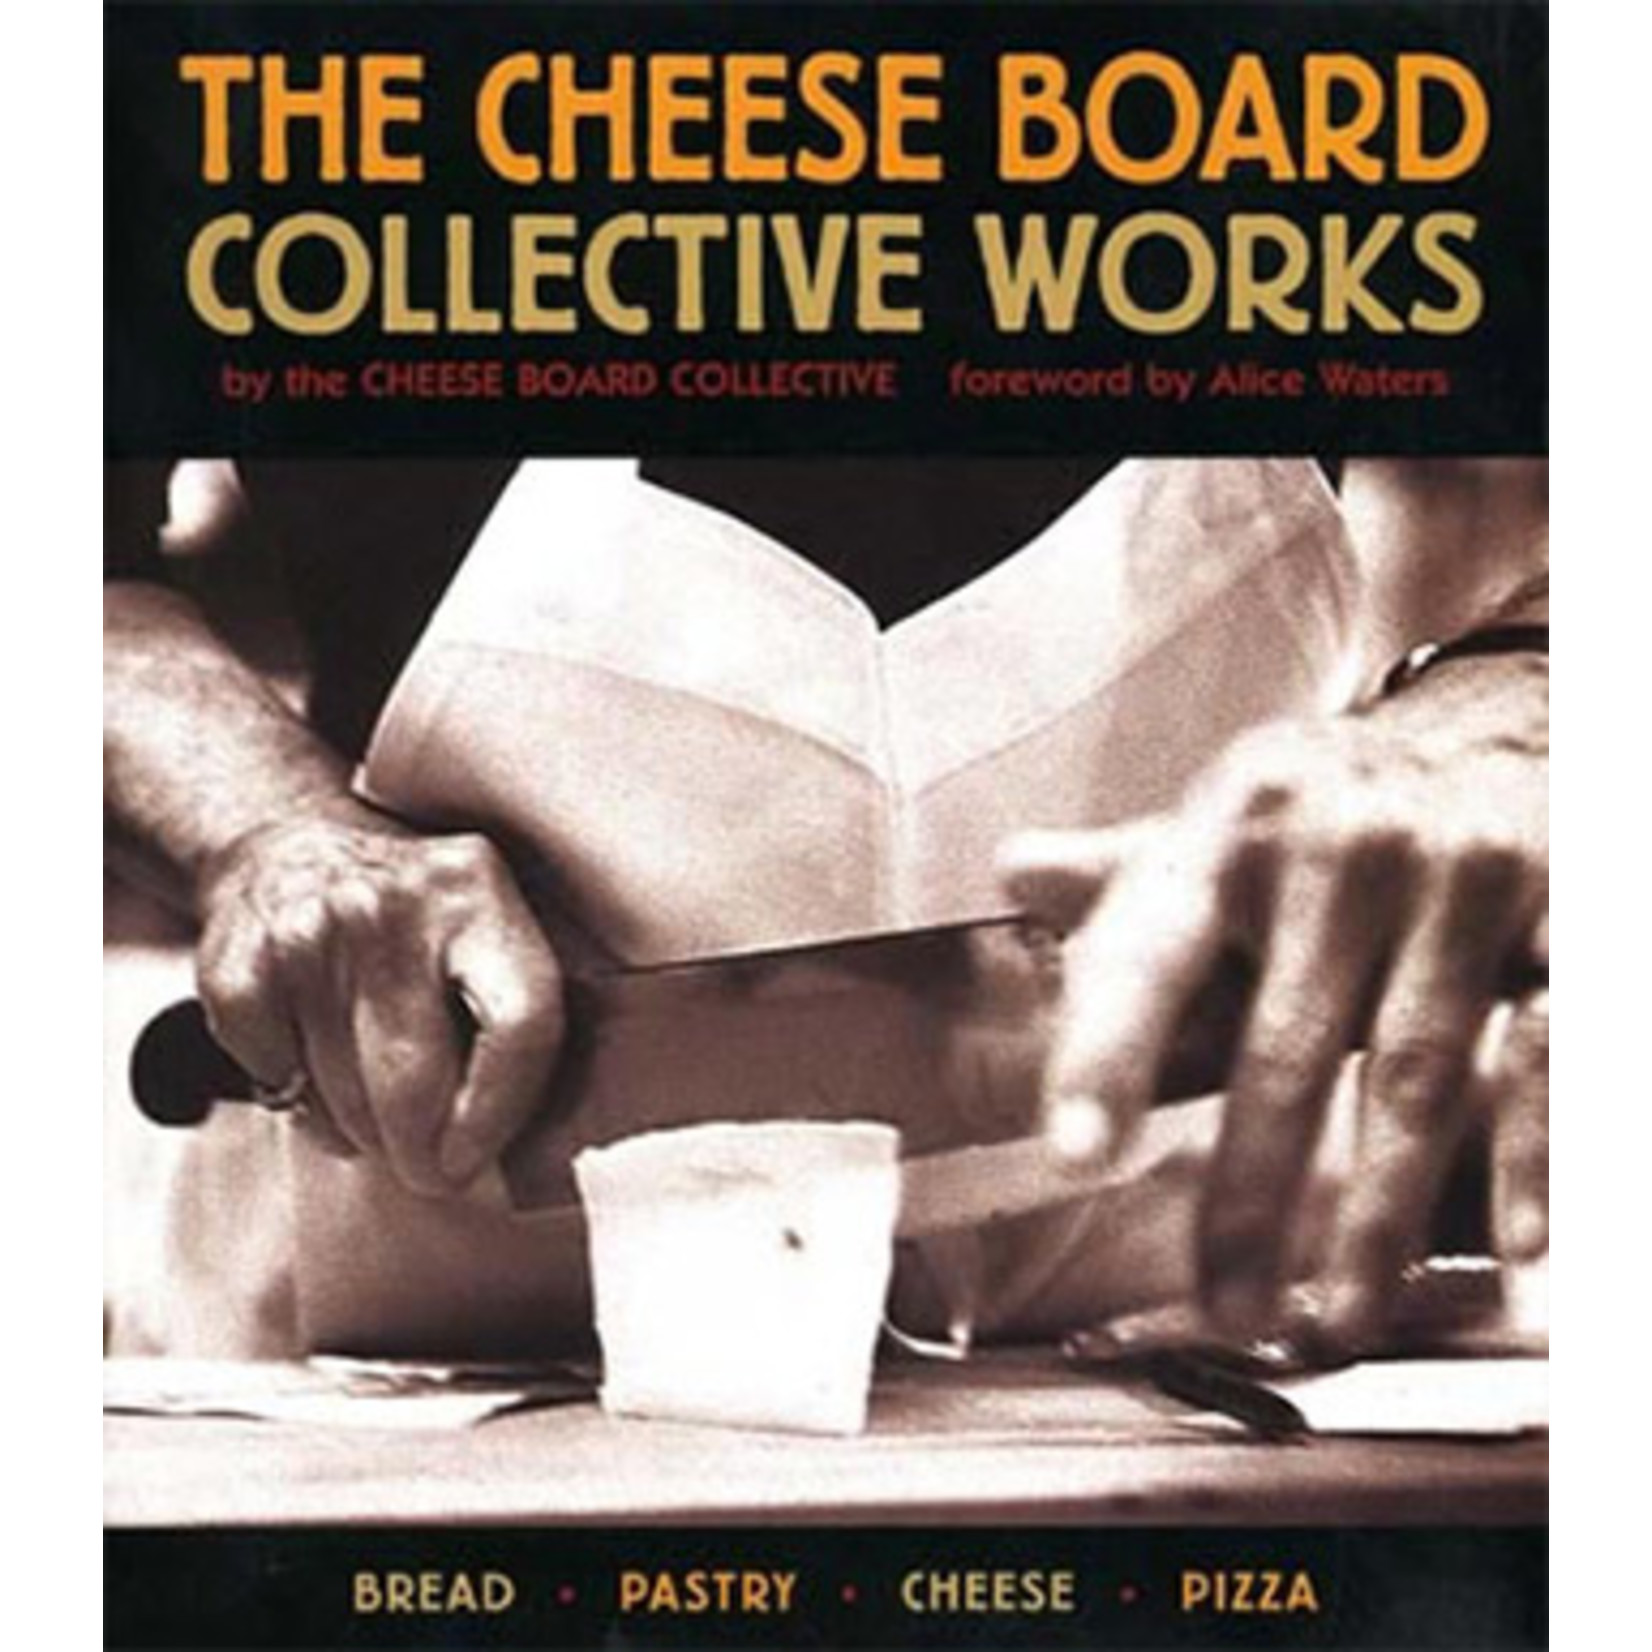 The Cheeseboard Collective Works